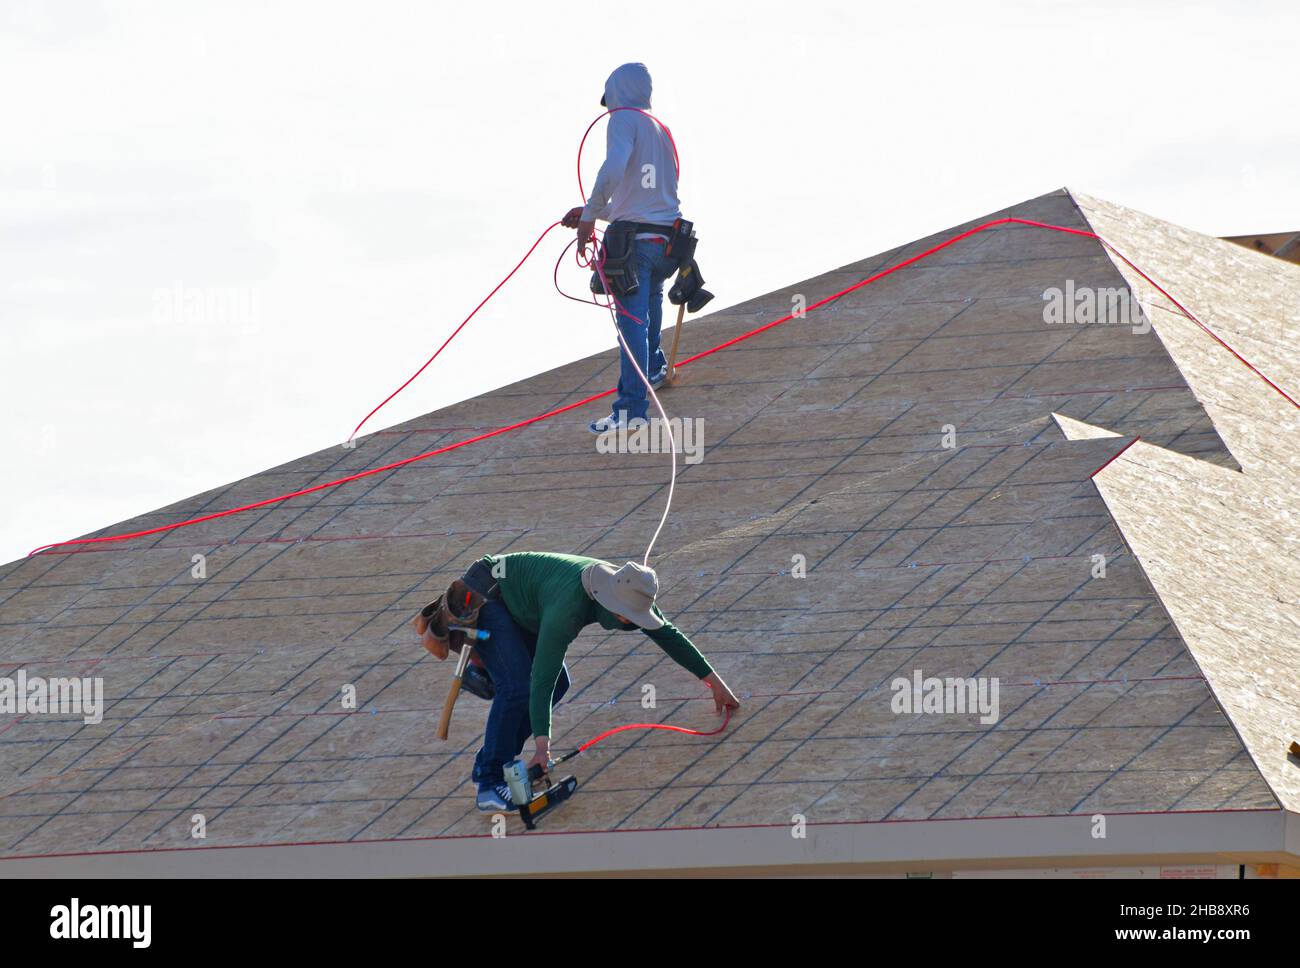 Residential Construction of roofing new homes. Stock Photo